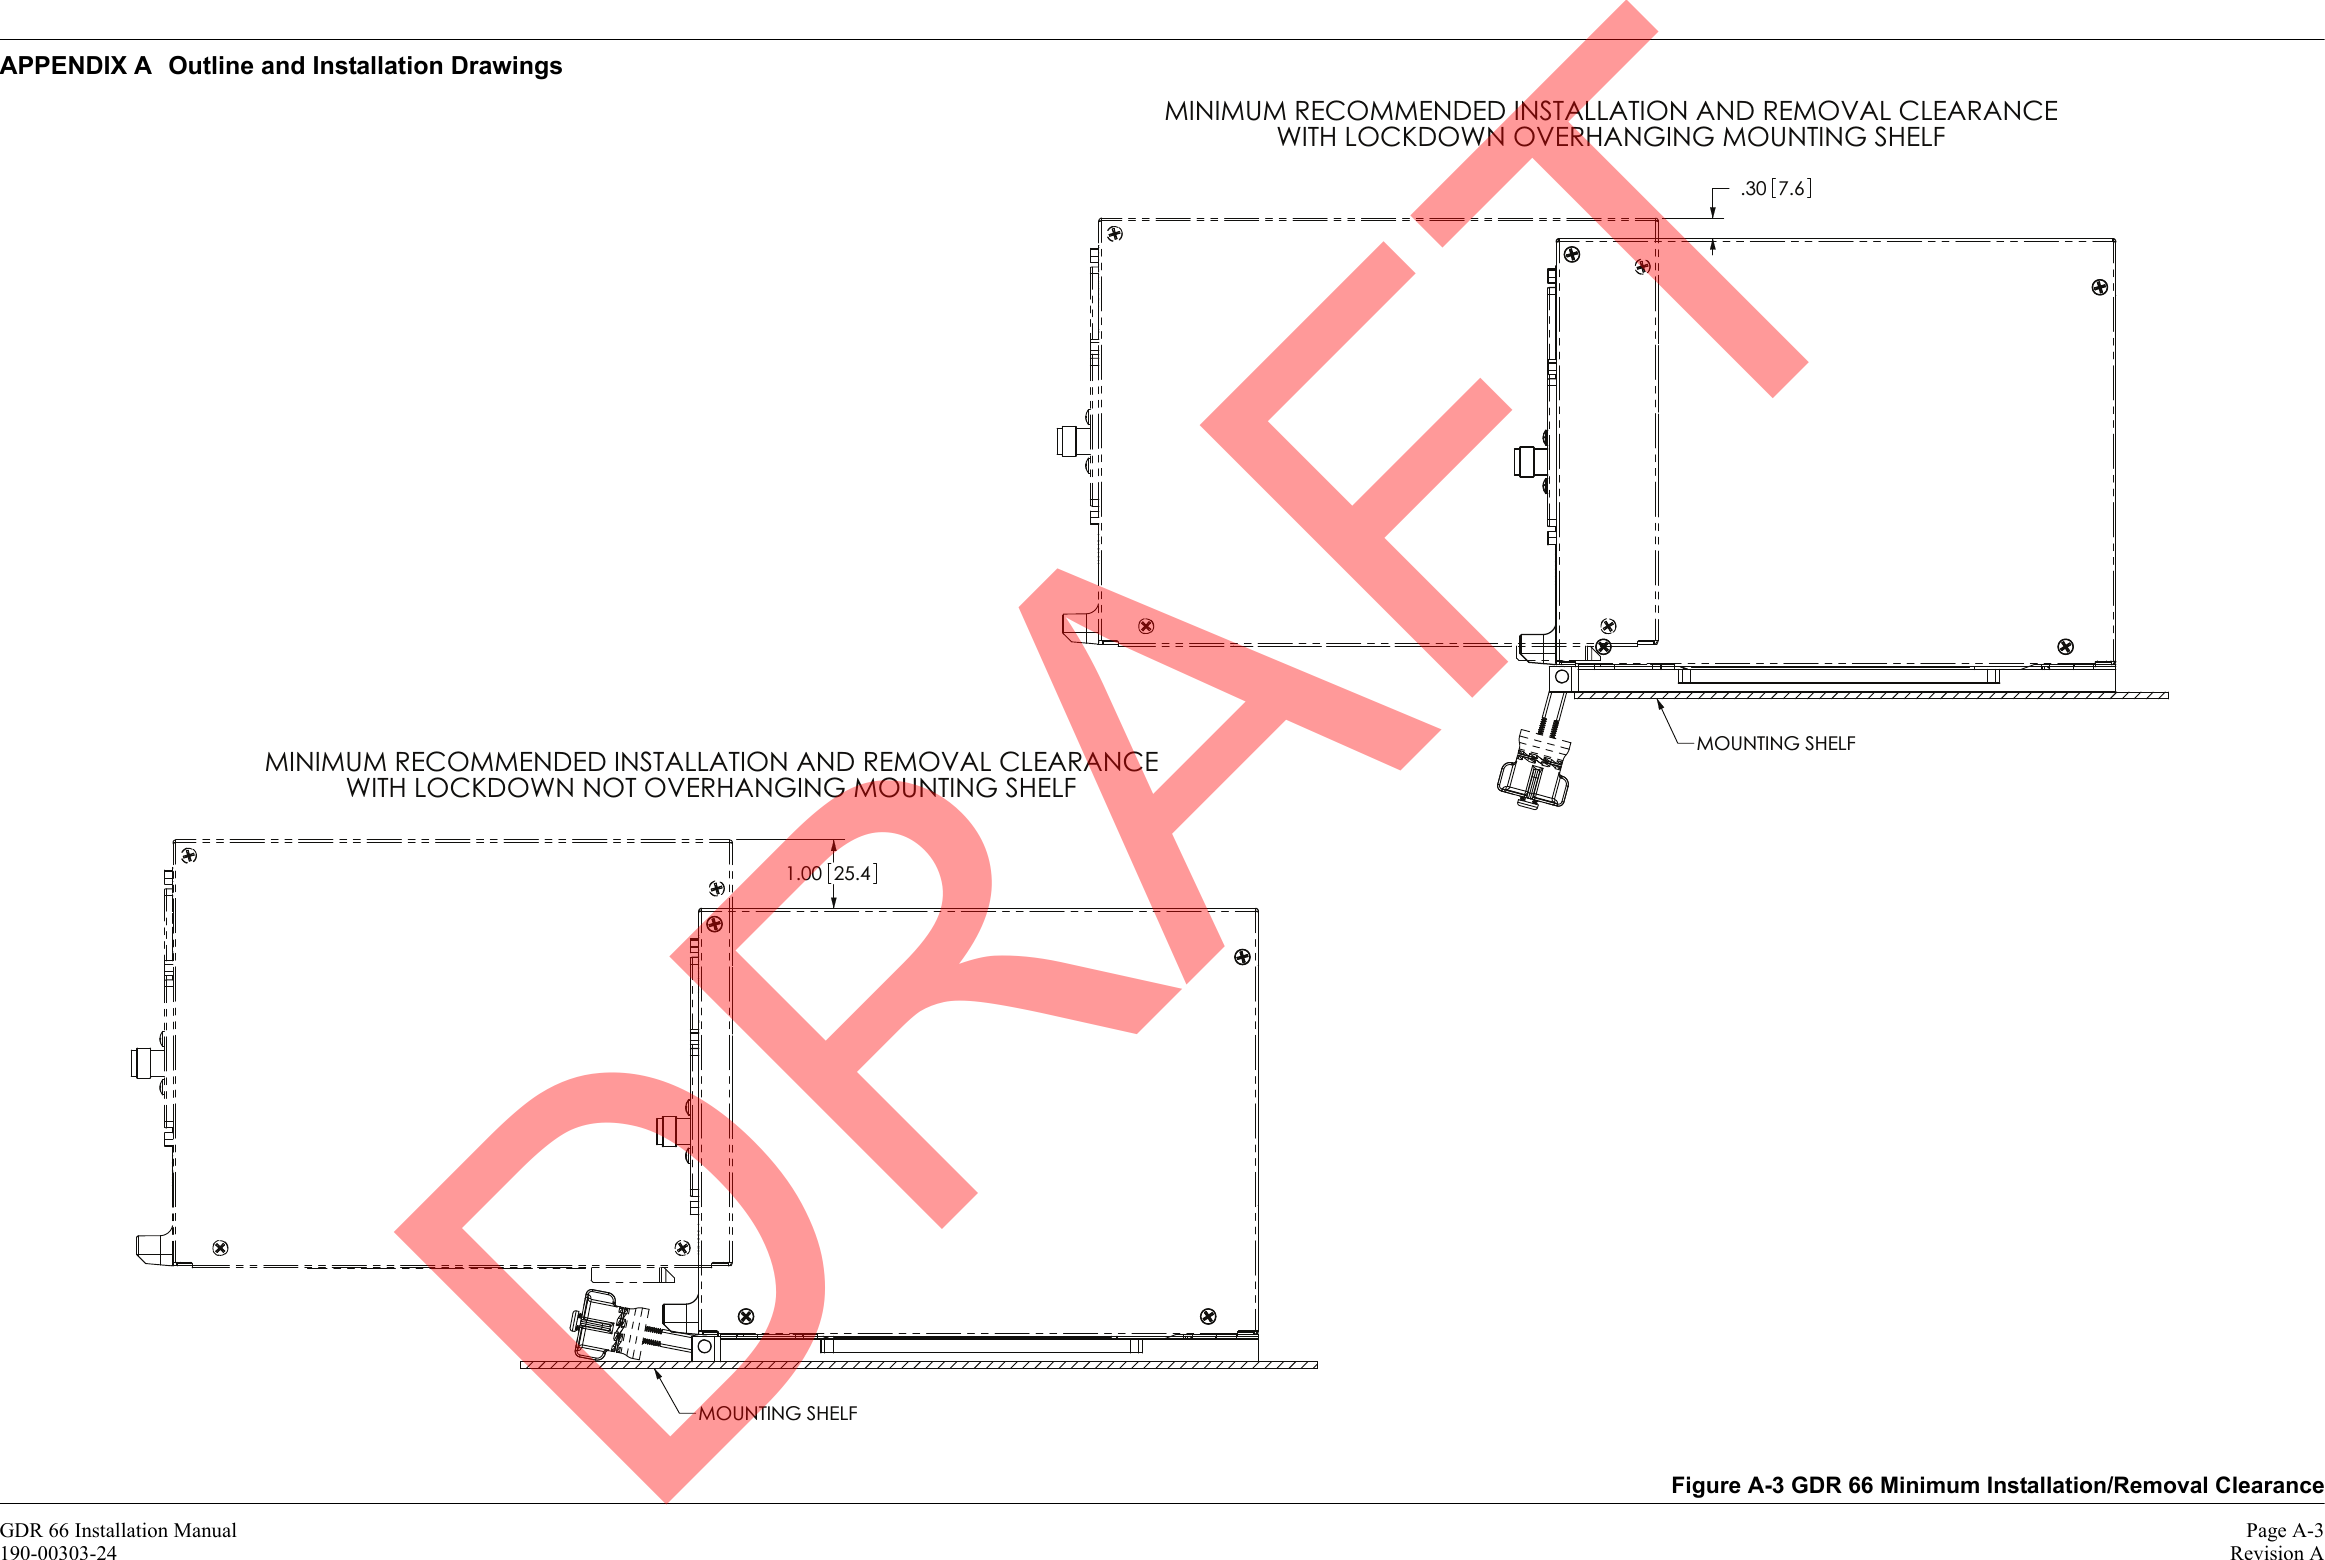 GDR 66 Installation Manual Page A-3190-00303-24 Revision AAPPENDIX A Outline and Installation DrawingsFigure A-3 GDR 66 Minimum Installation/Removal ClearanceMINIMUM RECOMMENDED INSTALLATION AND REMOVAL CLEARANCEWITH LOCKDOWN NOT OVERHANGING MOUNTING SHELFMOUNTING SHELF1.00 25.4MINIMUM RECOMMENDED INSTALLATION AND REMOVAL CLEARANCEWITH LOCKDOWN OVERHANGING MOUNTING SHELFMOUNTING SHELF.30 7.6DRAFT